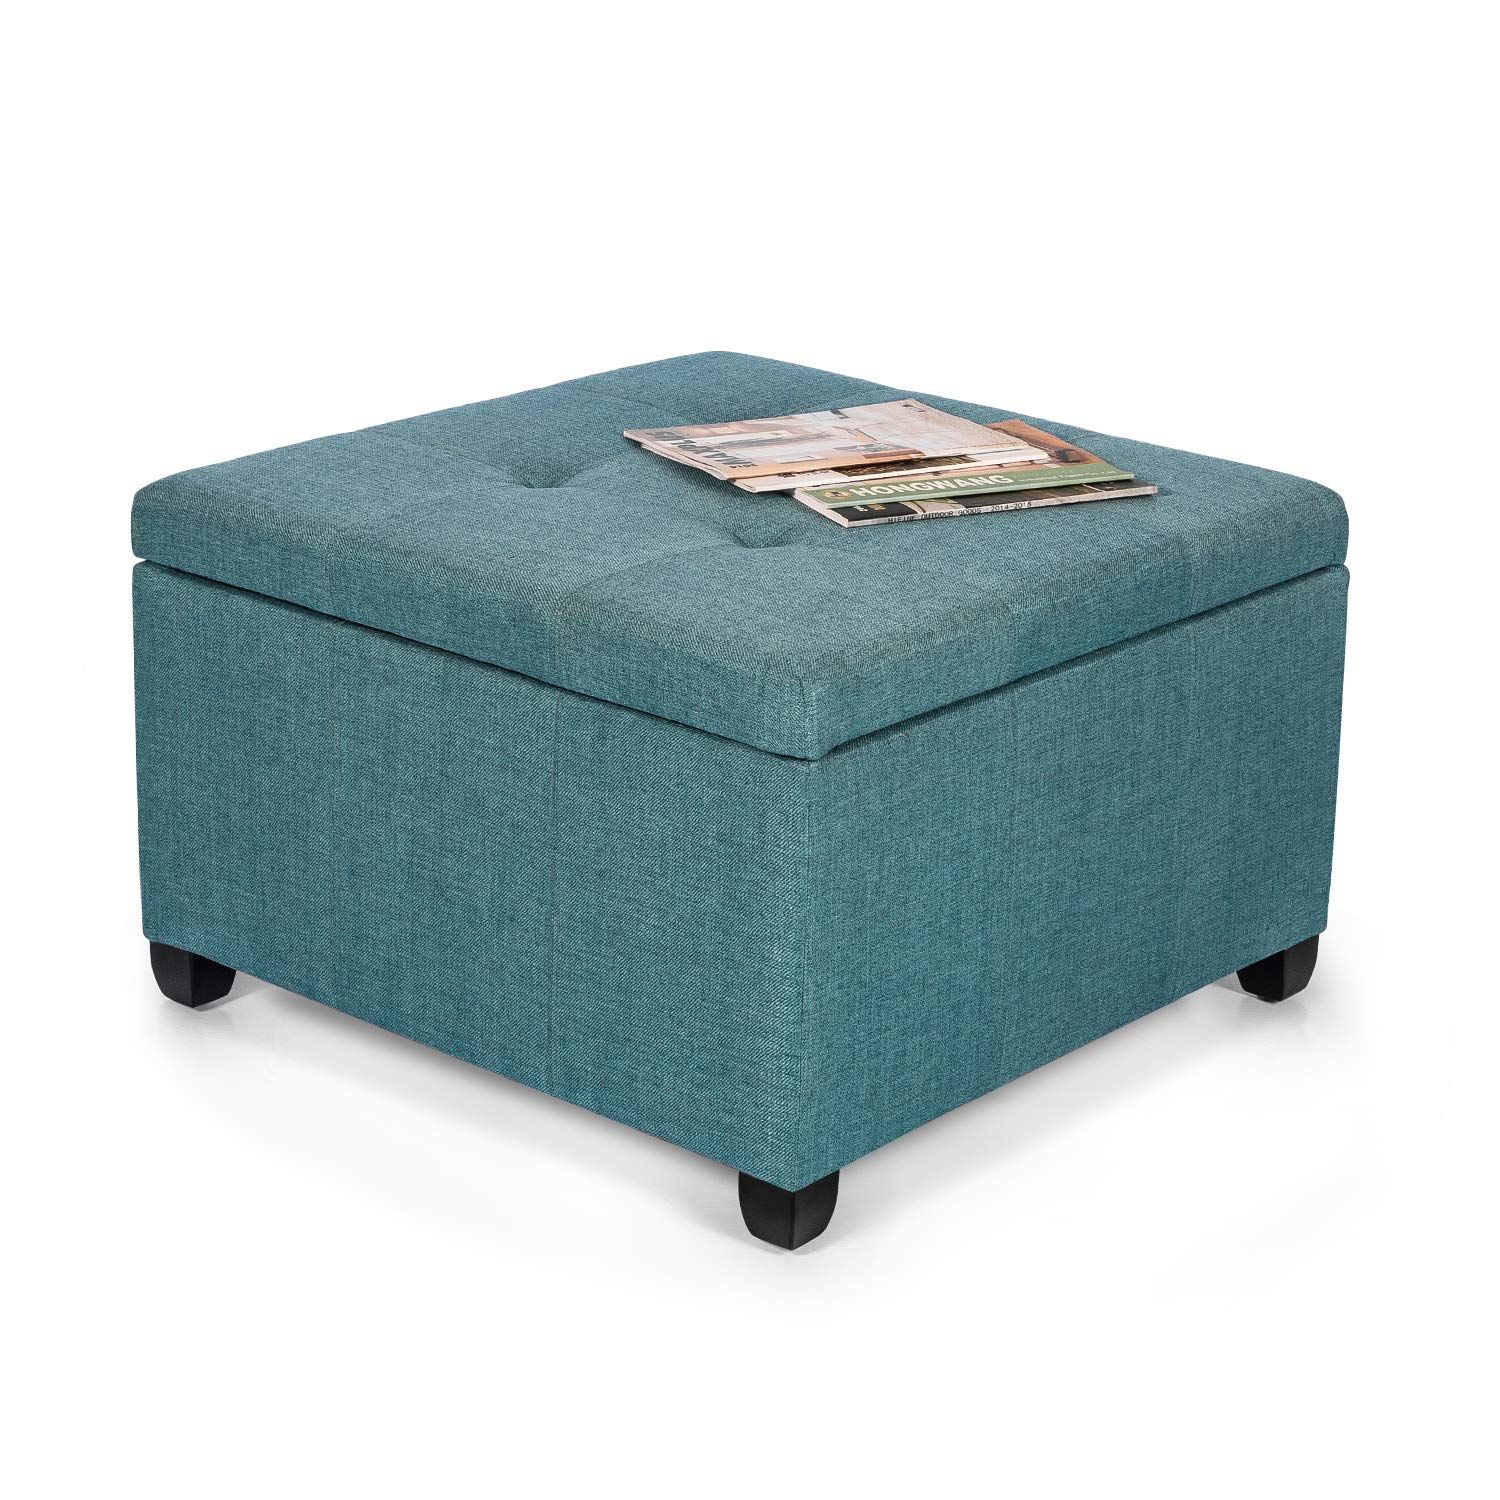 Homebeez Classic Square Seat Tufted Fabric Ottoman With Storage Chest Within Charcoal Fabric Tufted Storage Ottomans (View 7 of 20)